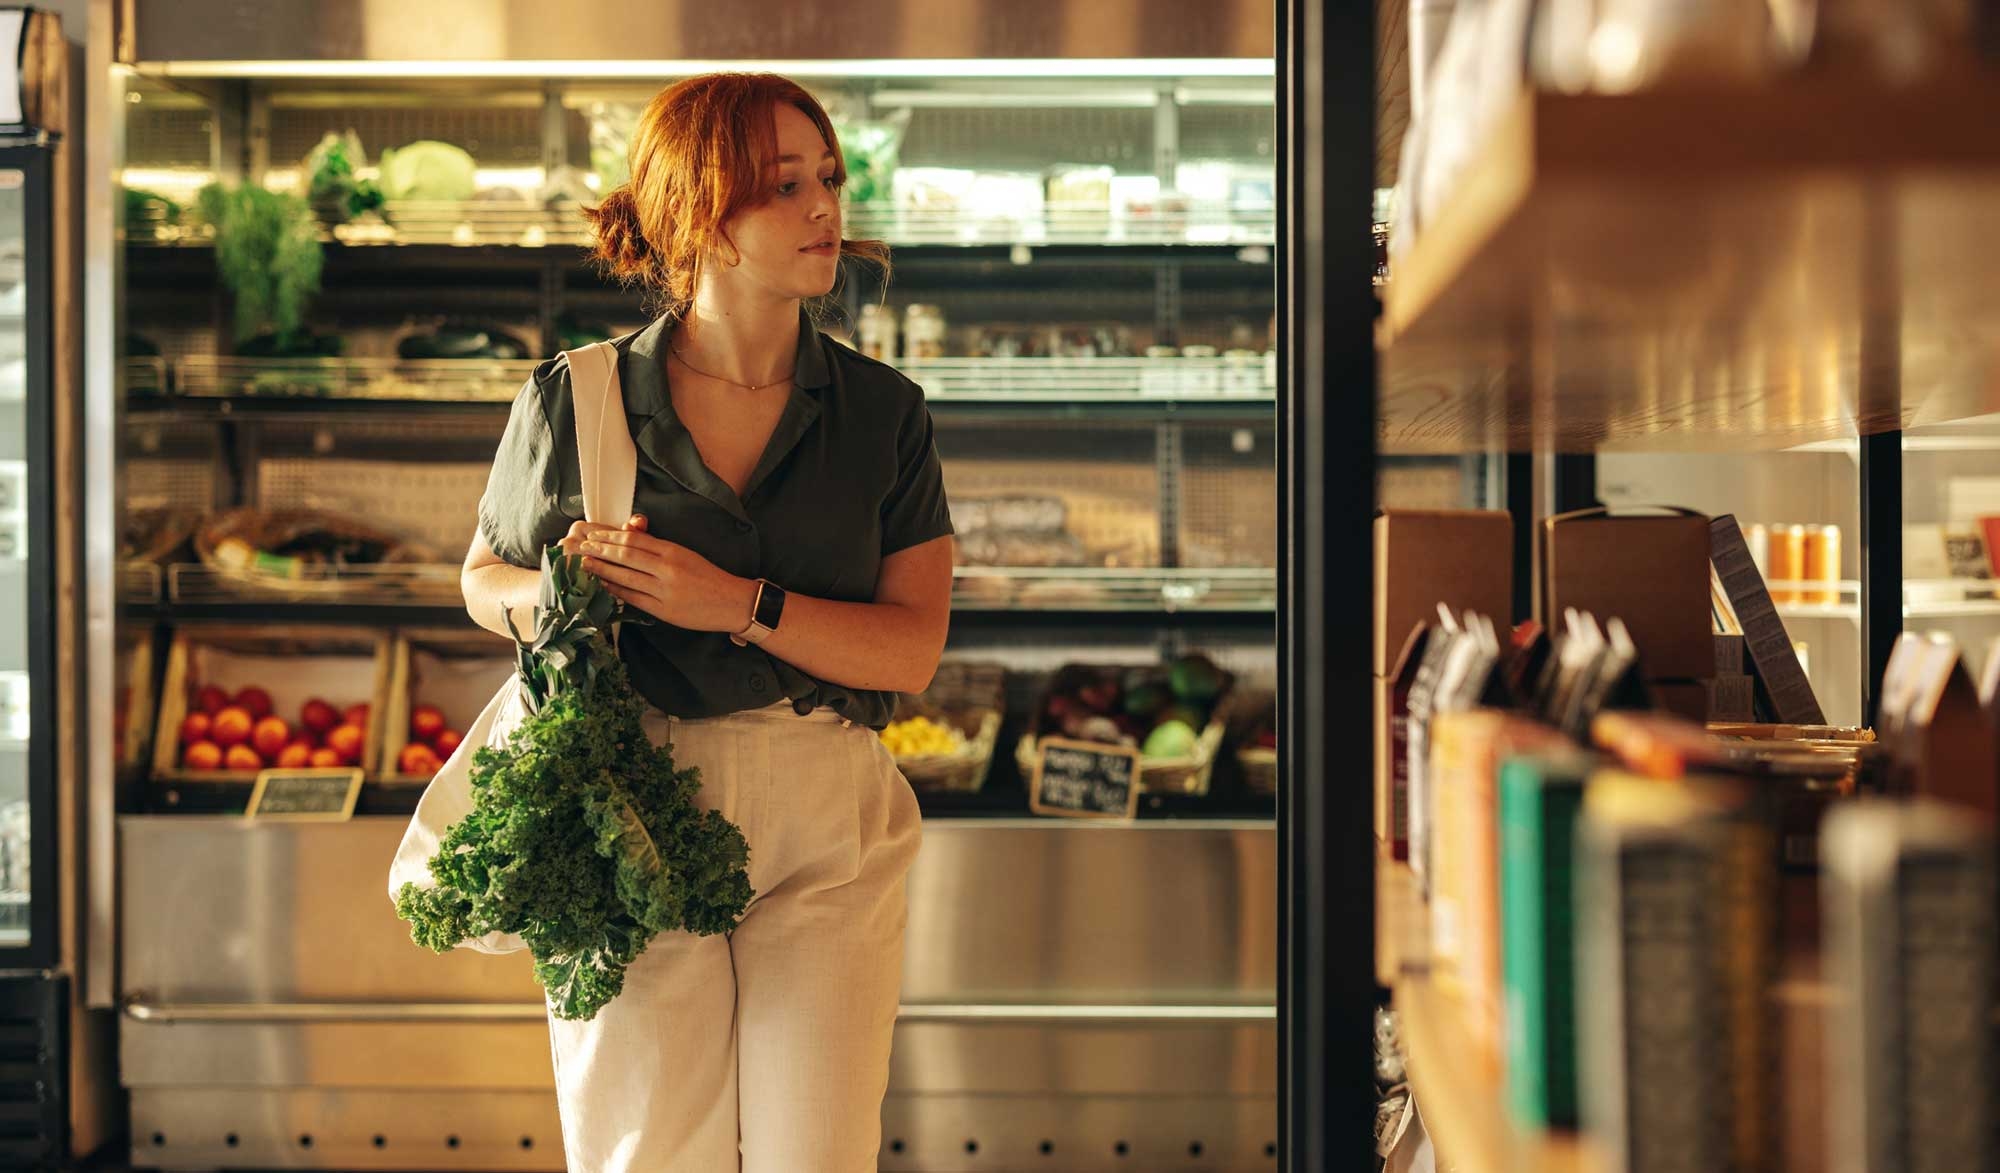 a young woman is browsing grocery store looking for fresh produce, she is carrying a bag with greens spilling out